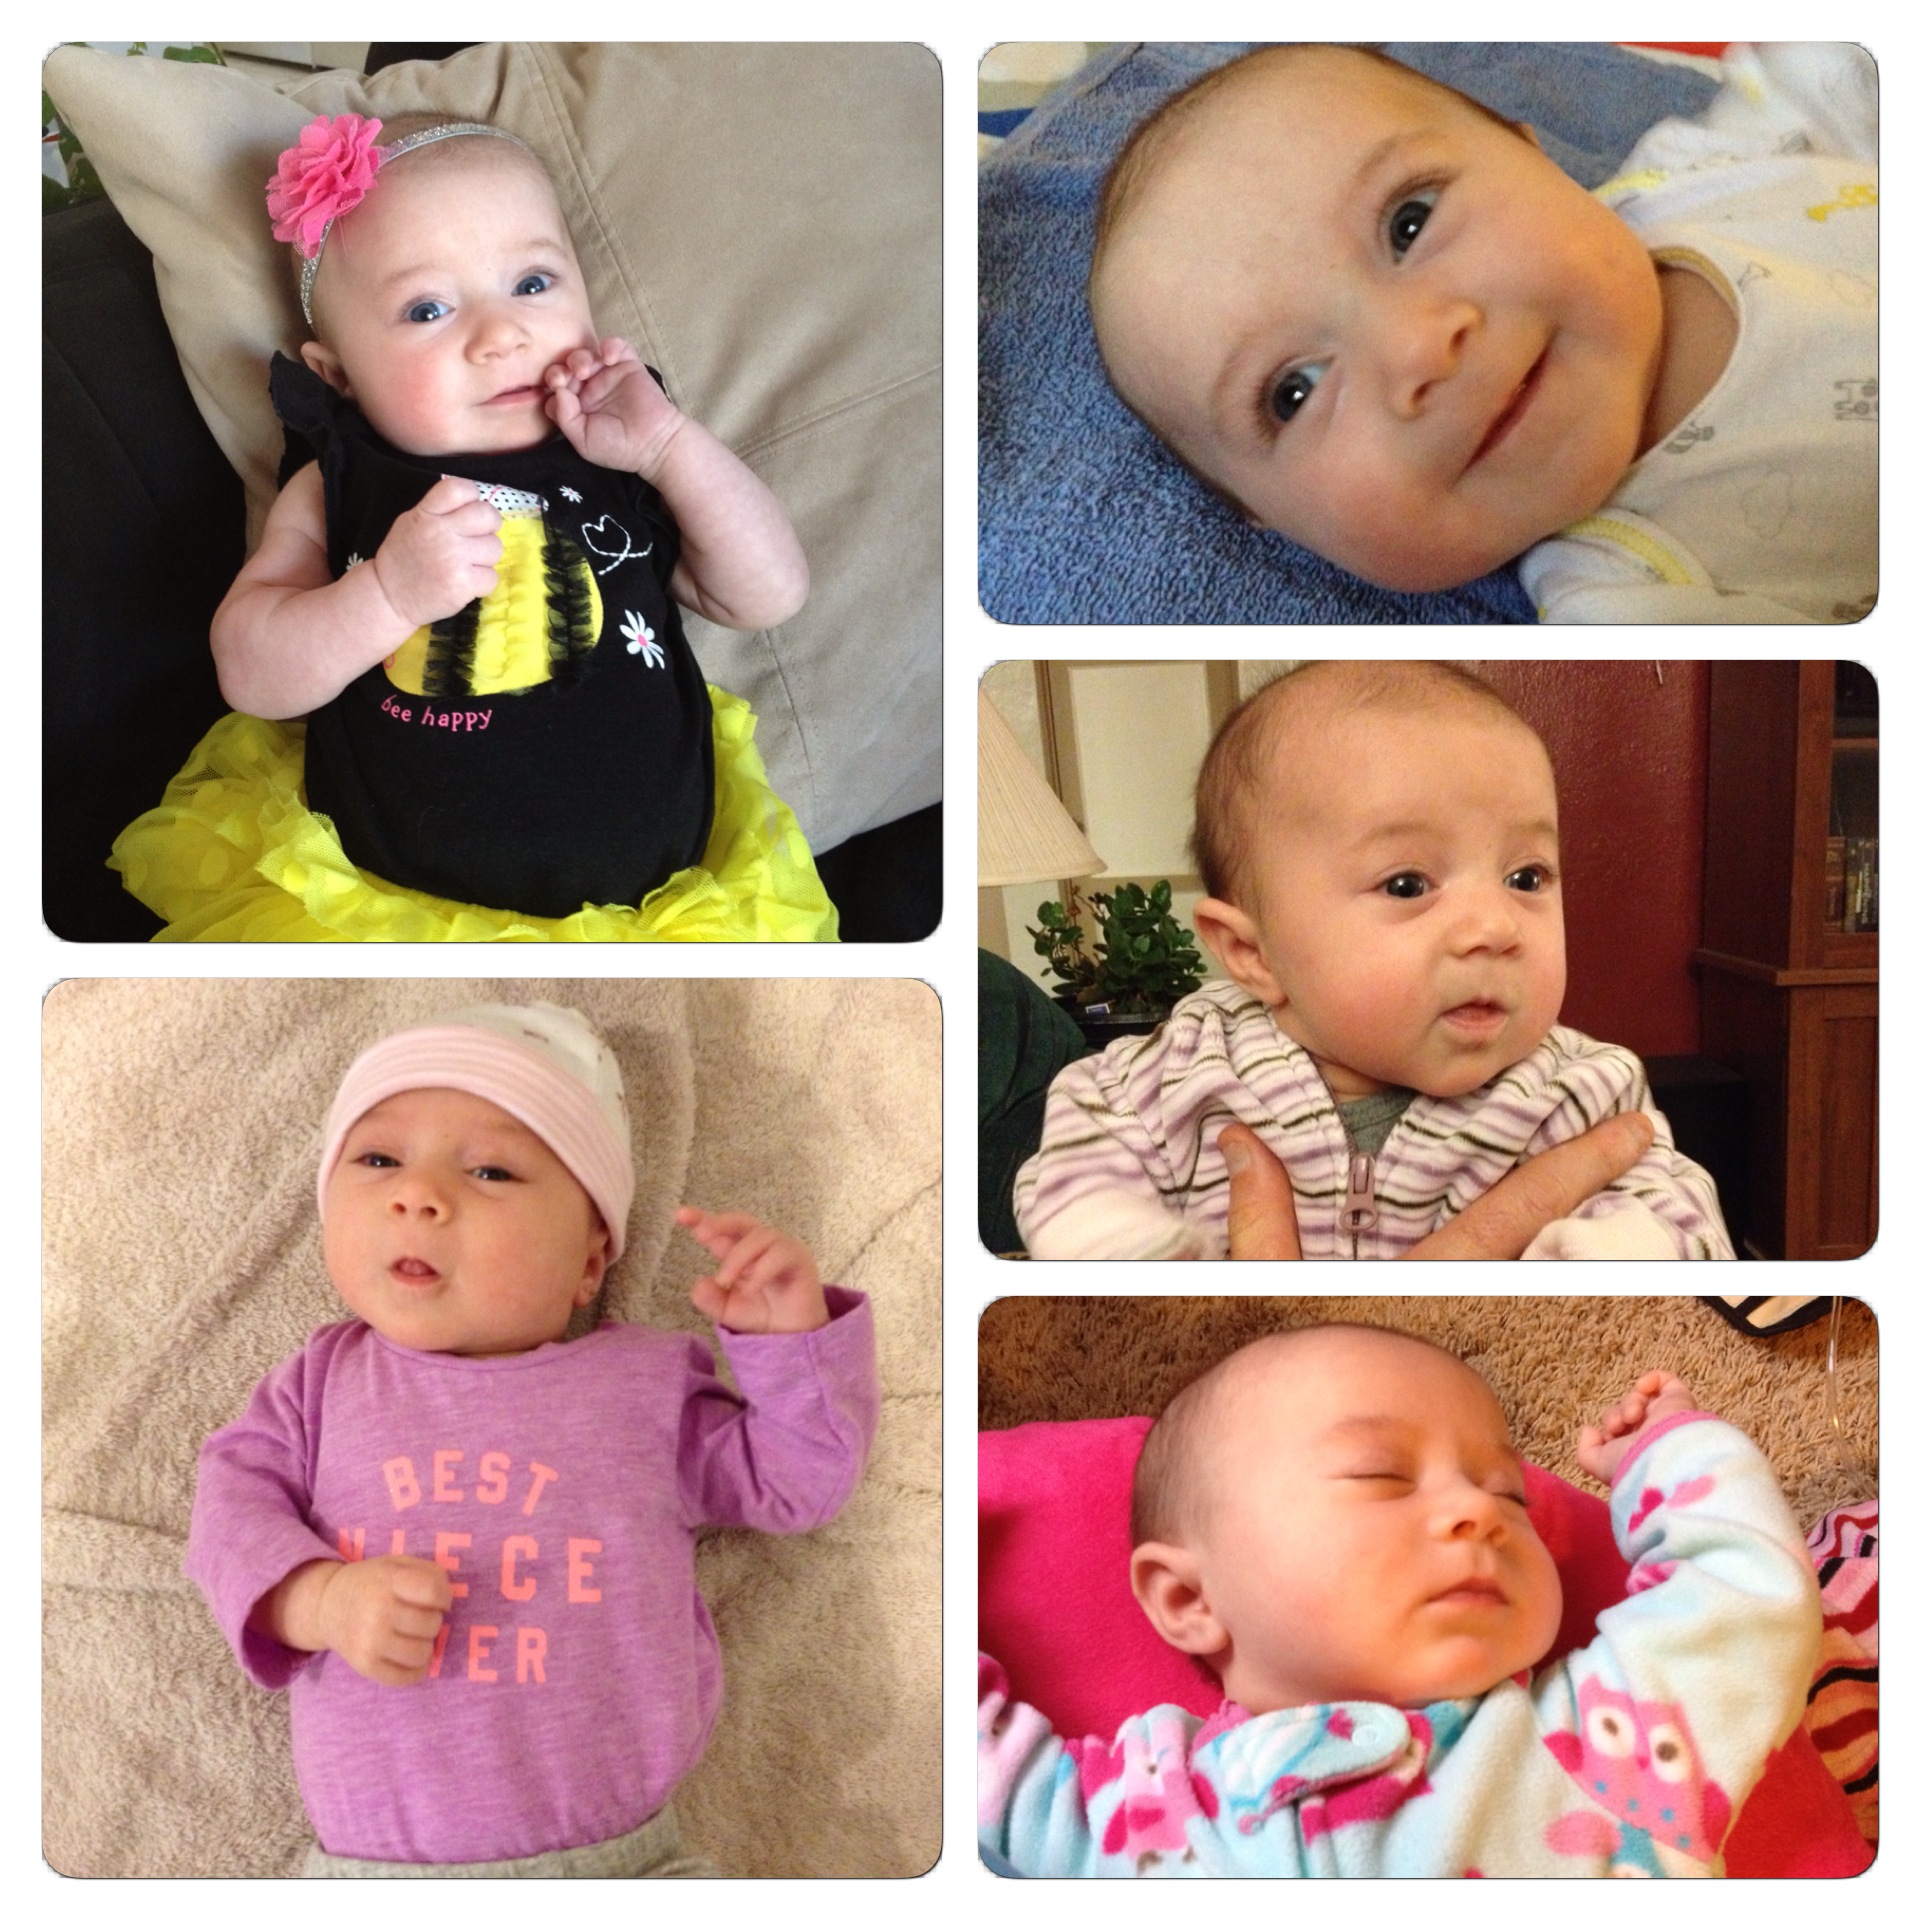 Here are the latest photos of Mikayla. I meet her soon.